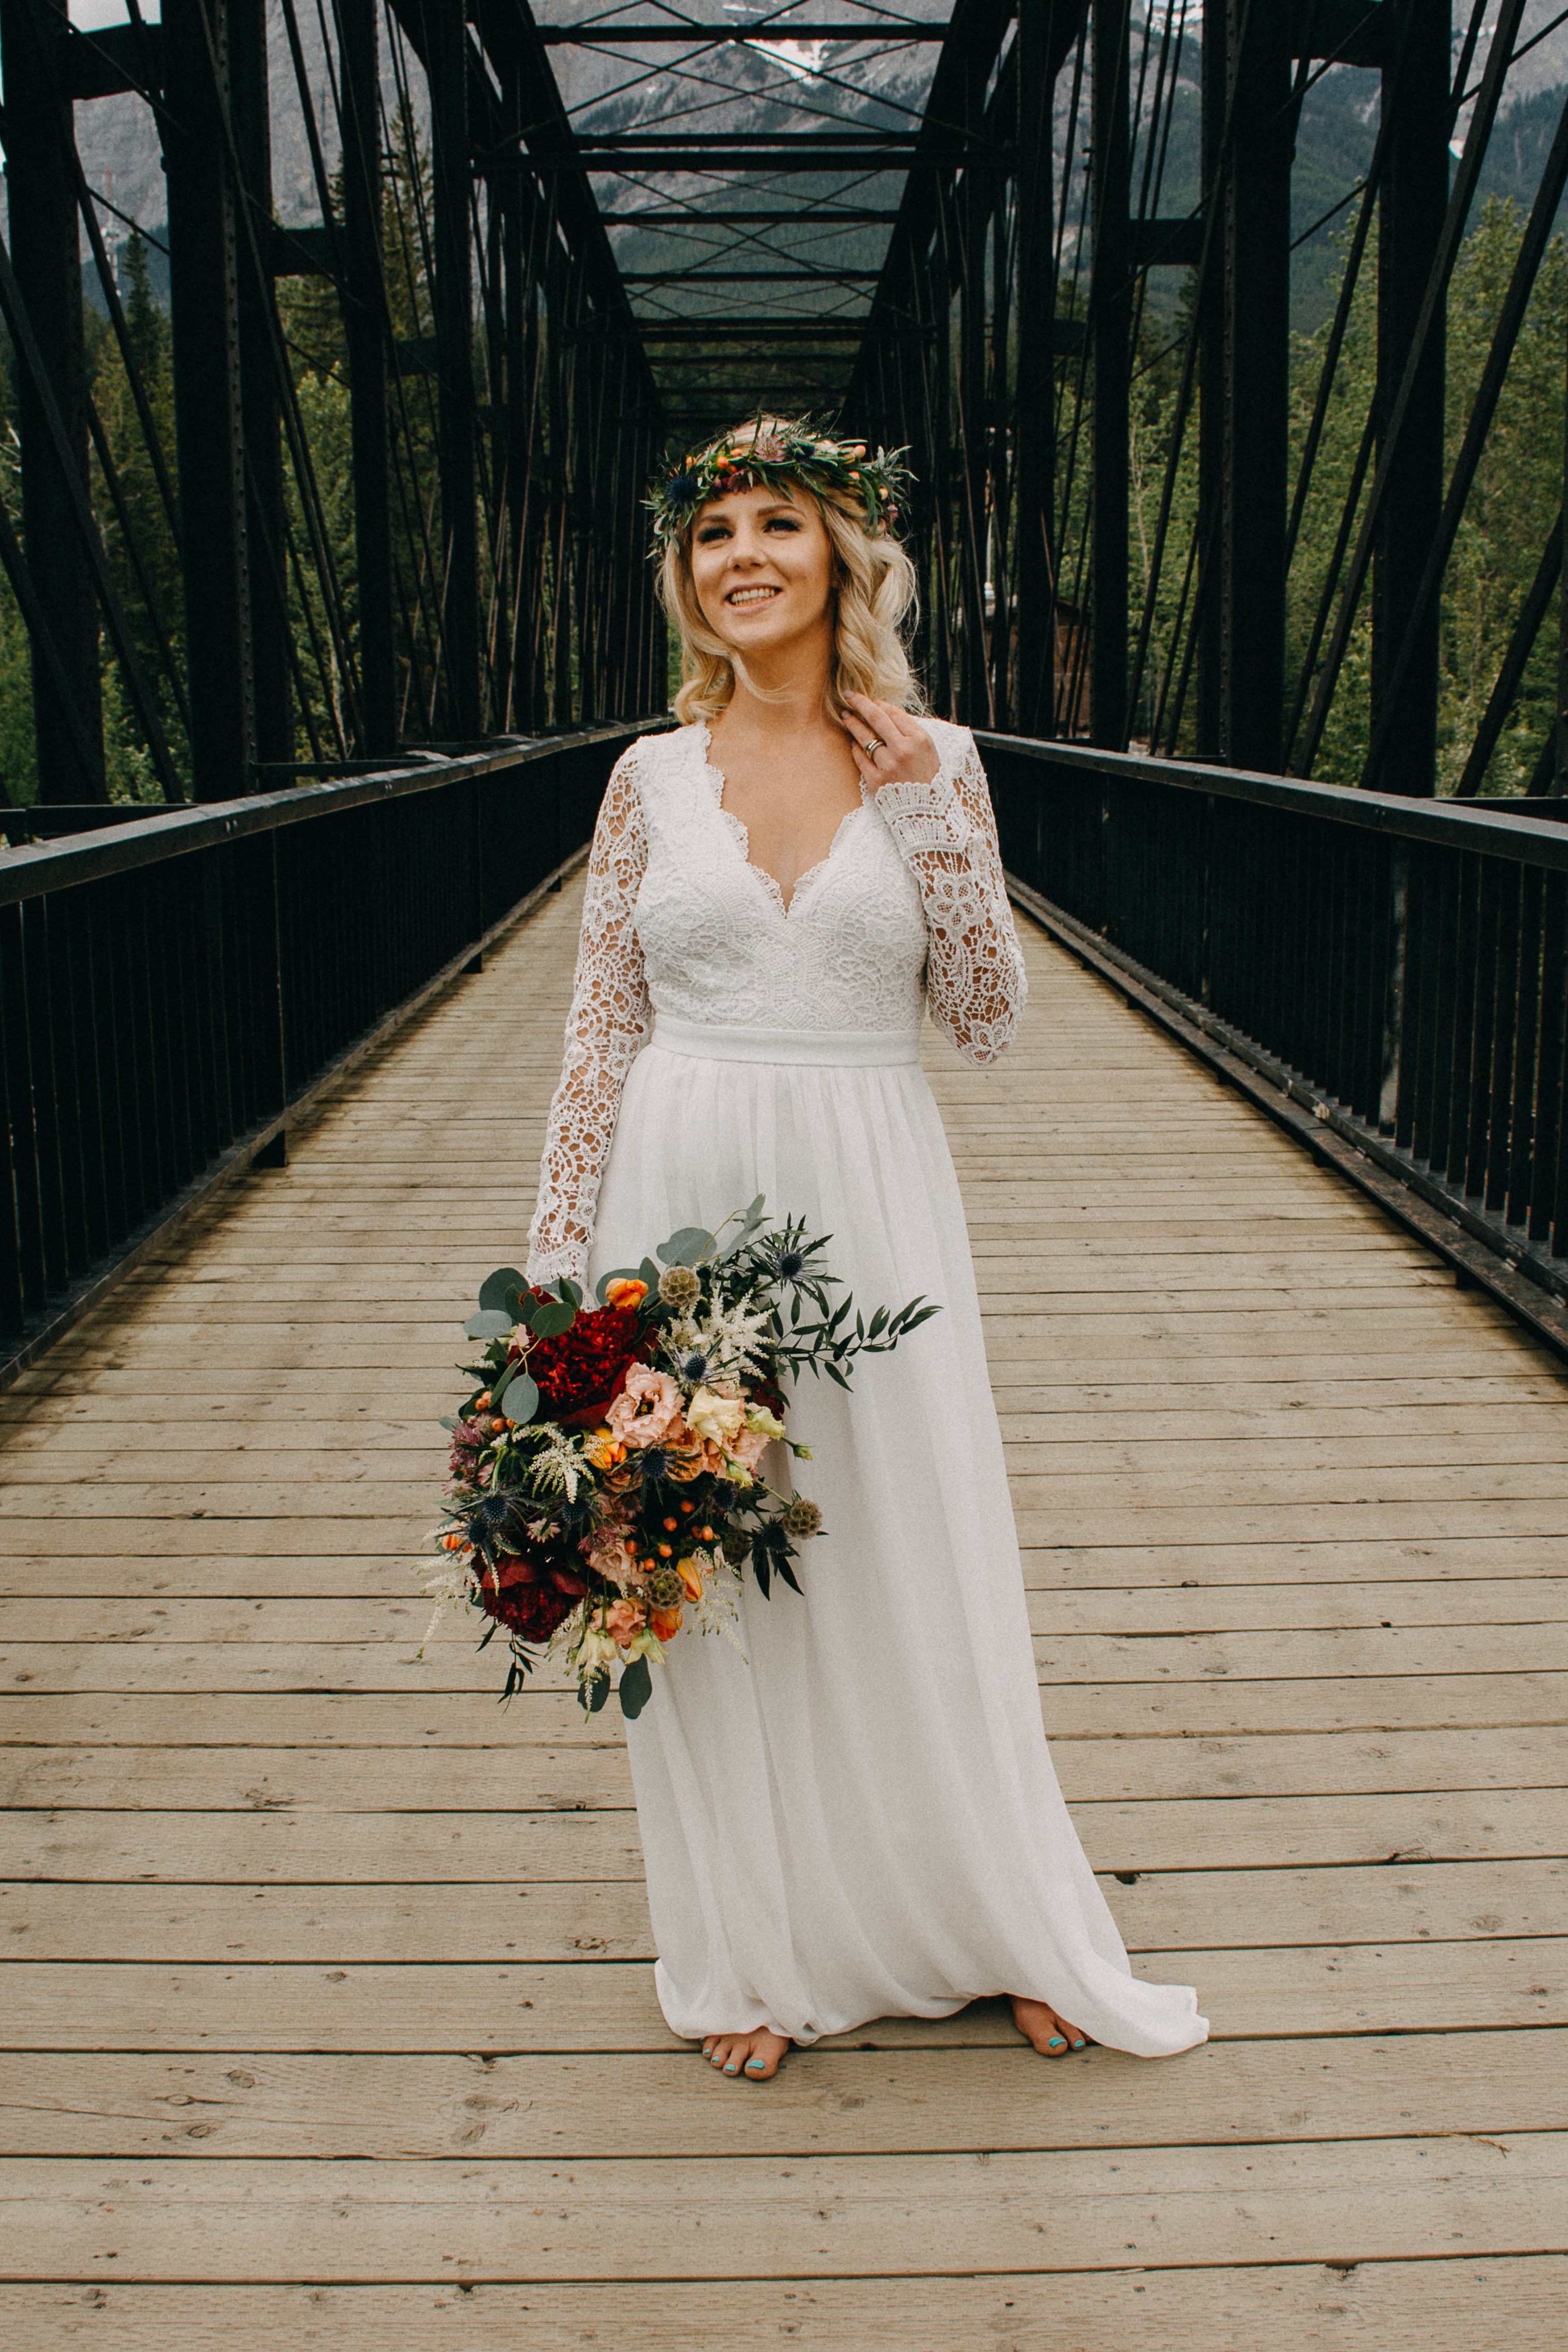 The bride holding her bouquet on the engine bridge in Canmore, Alberta